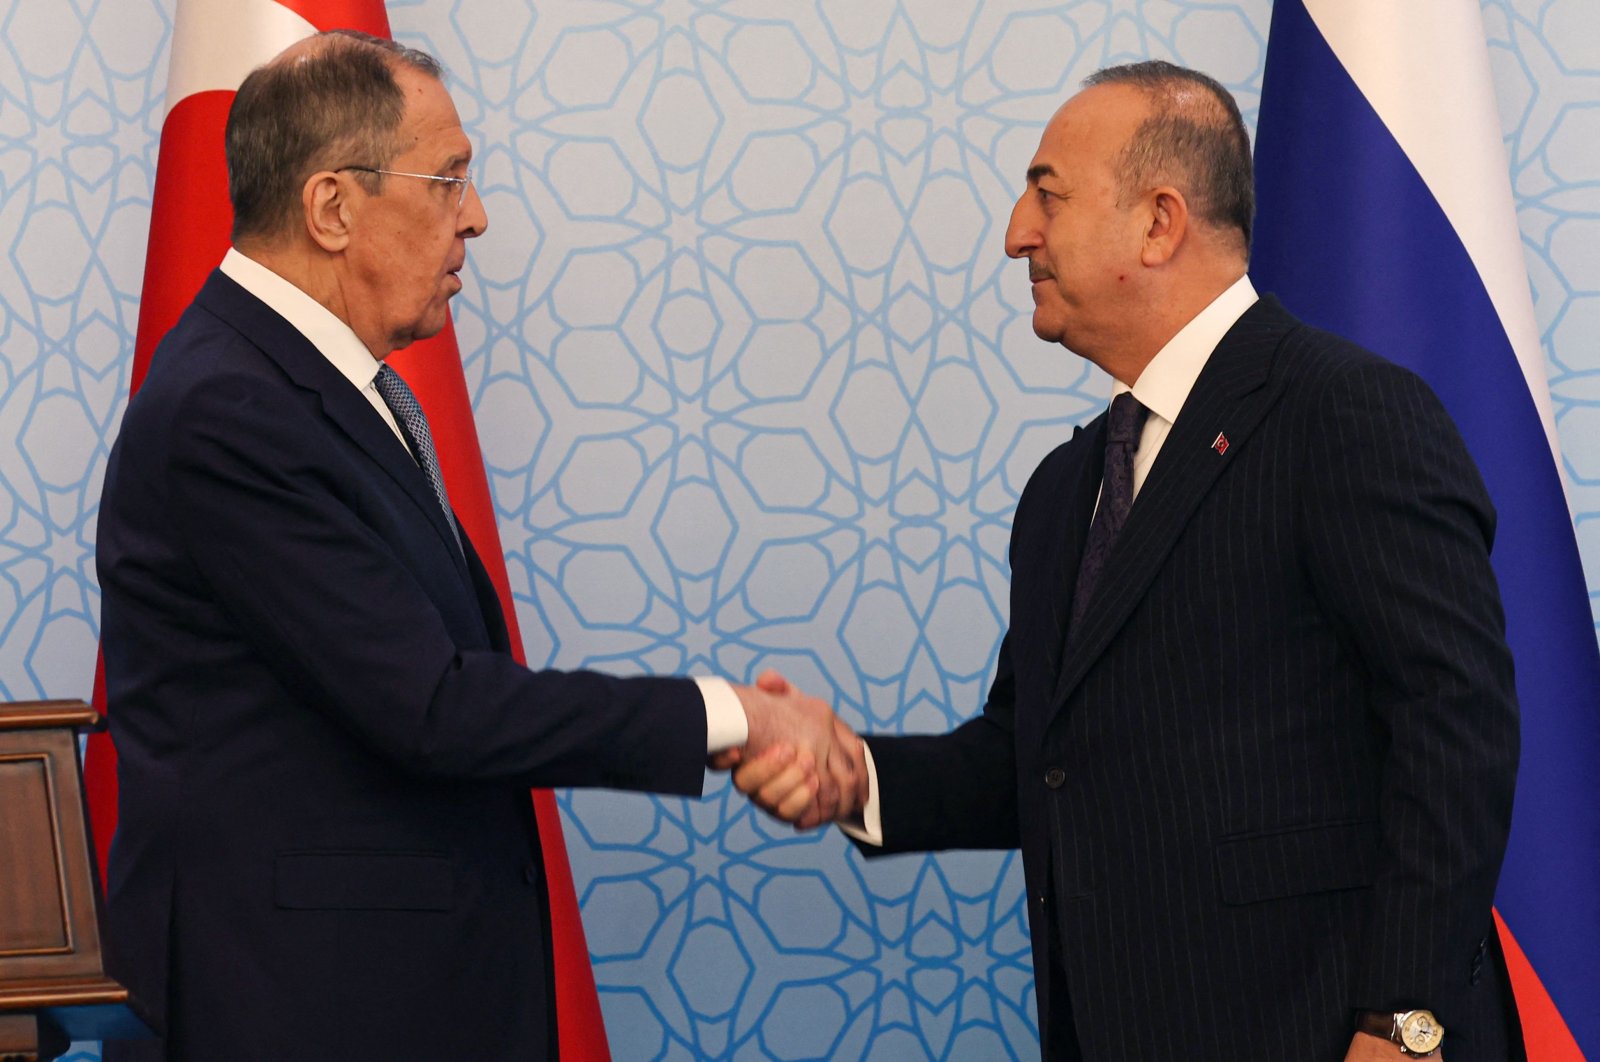 Foreign Minister Mevlüt Çavuşoğlu (R) shakes hands with his Russian counterpart Sergey Lavrov following their joint news conference following talks in Ankara, Türkiye, April 7, 2023. (AFP Photo)